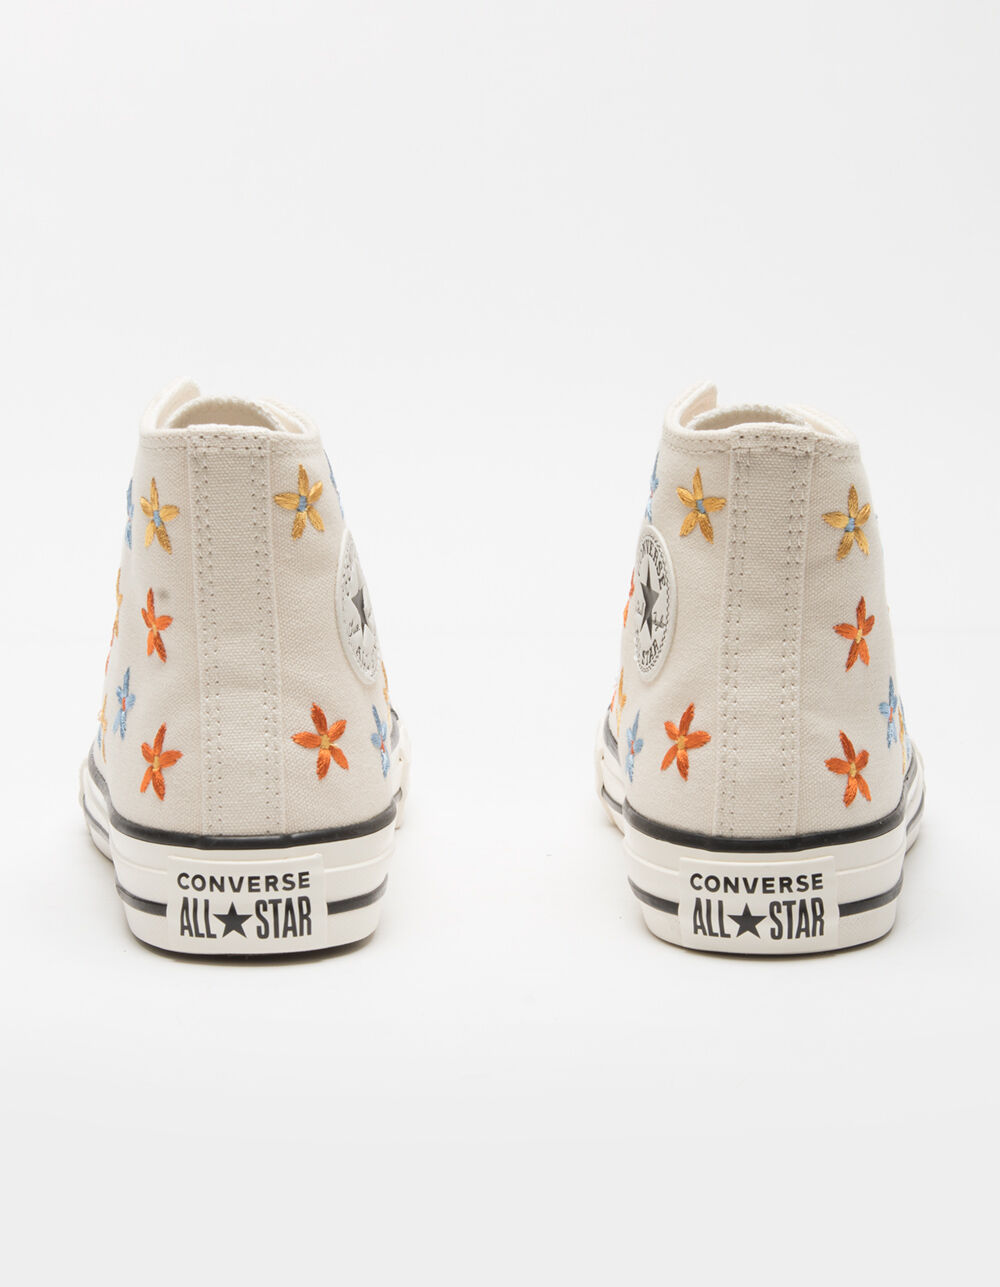 Converse All Star Low 'Spring Flowers' – The Wicker Bee